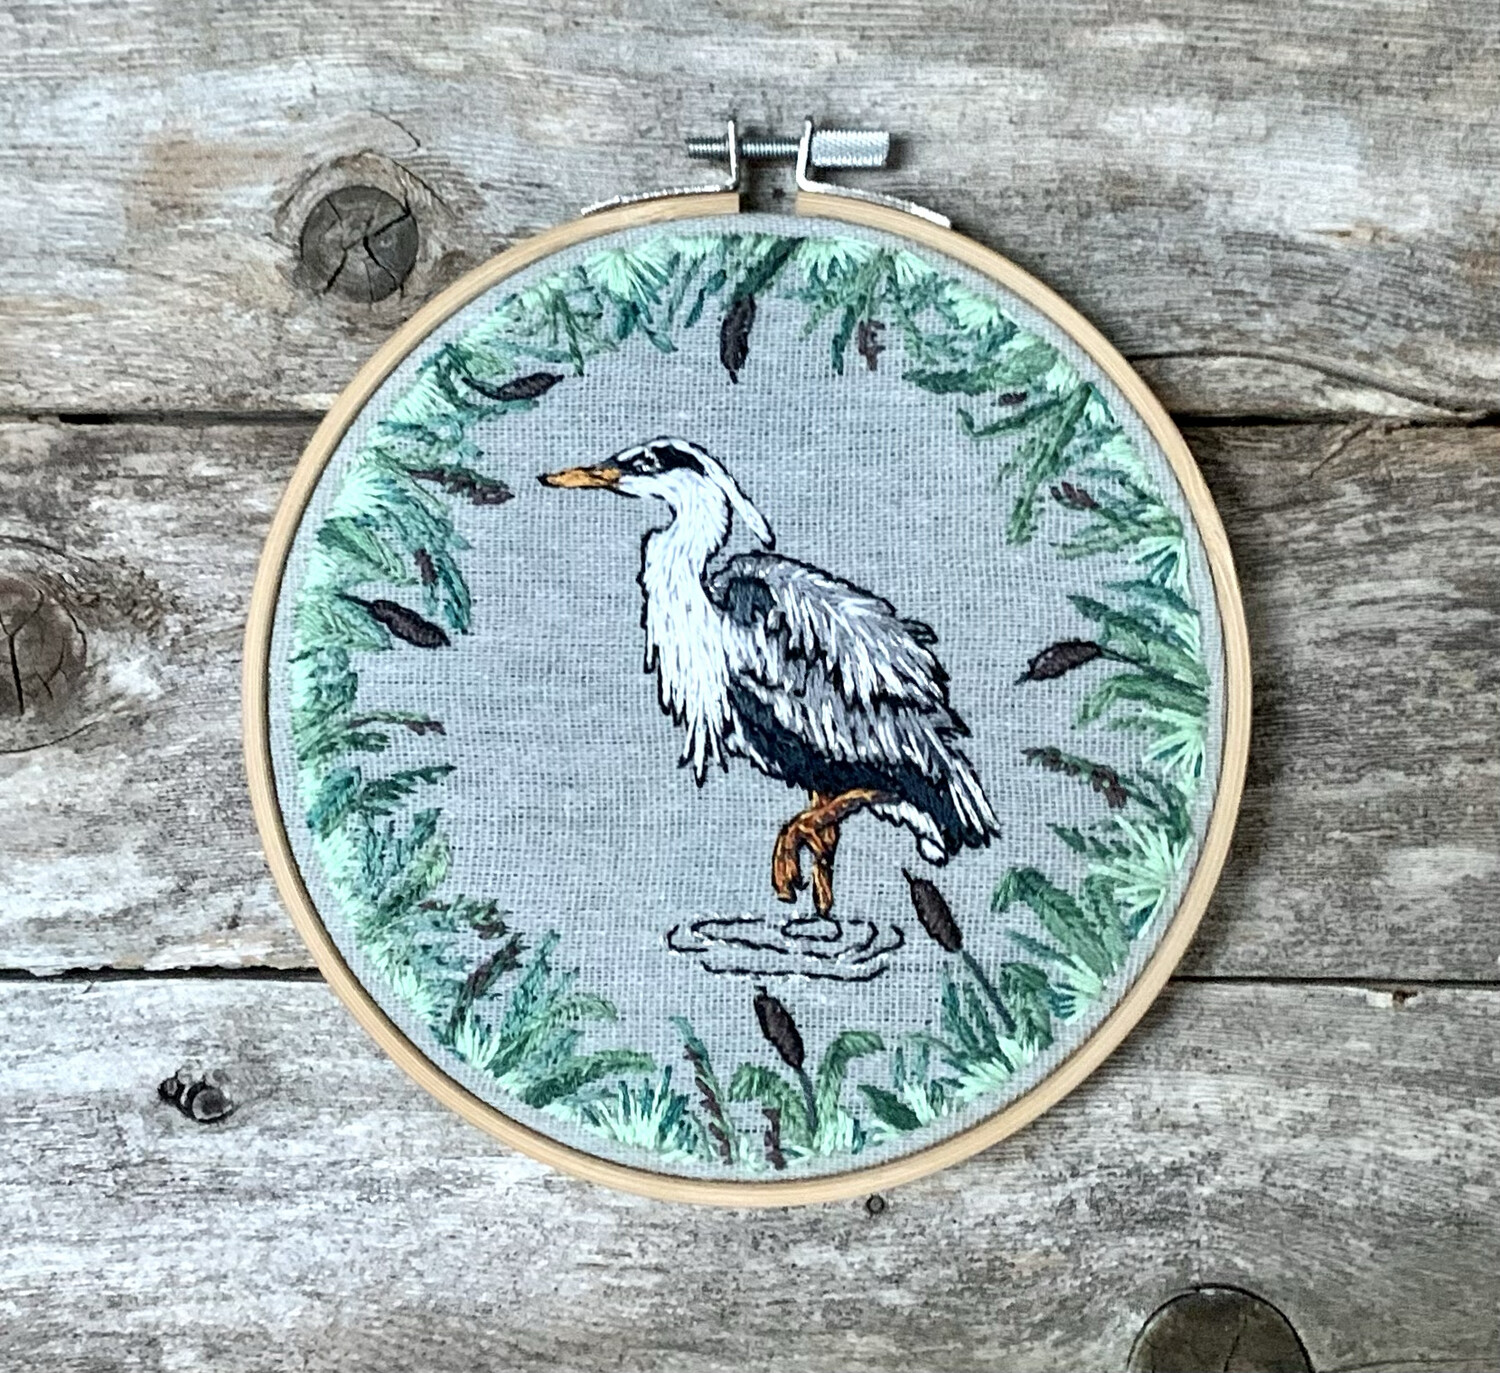 Heron And Grasses 6” Hoop - One-of-a-Kind Hand-Sewn Artwork (not a kit)